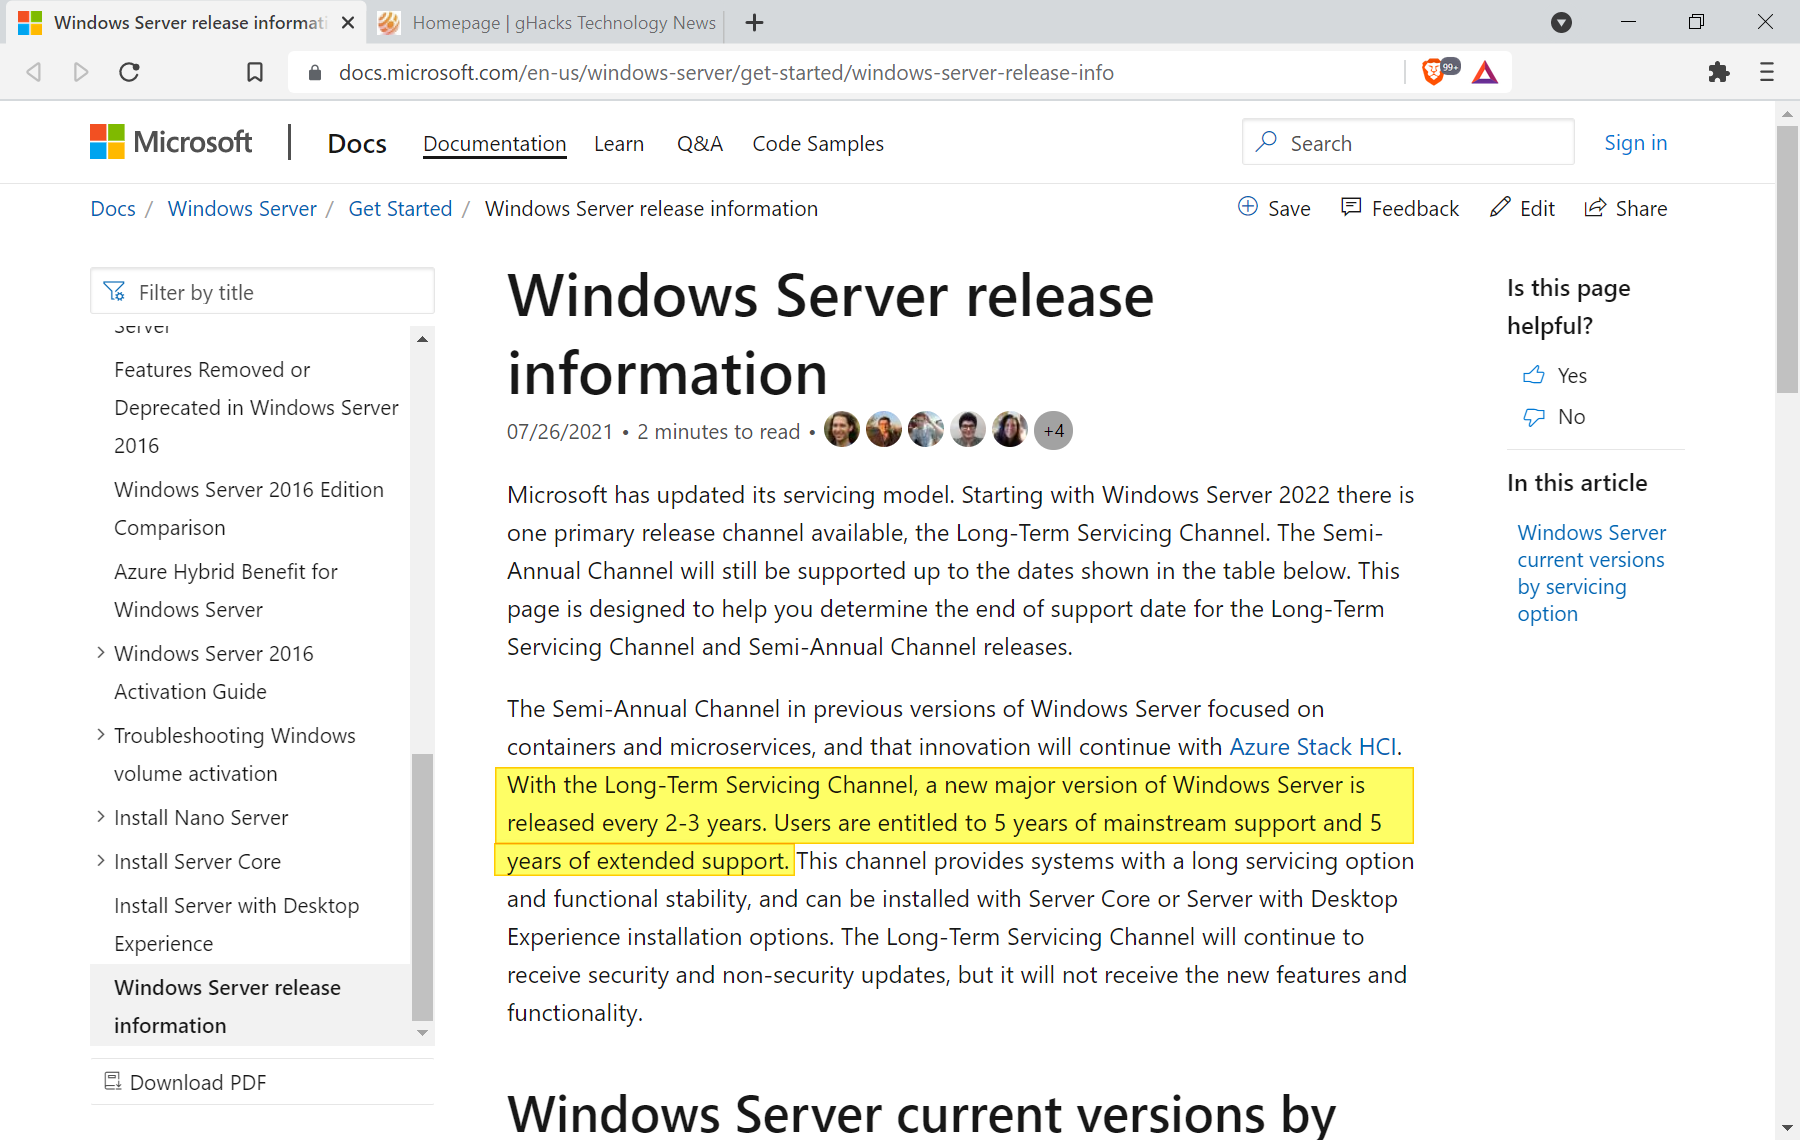 All future Windows Server releases receive 10 years of support windows-server-2022-ltsc.png